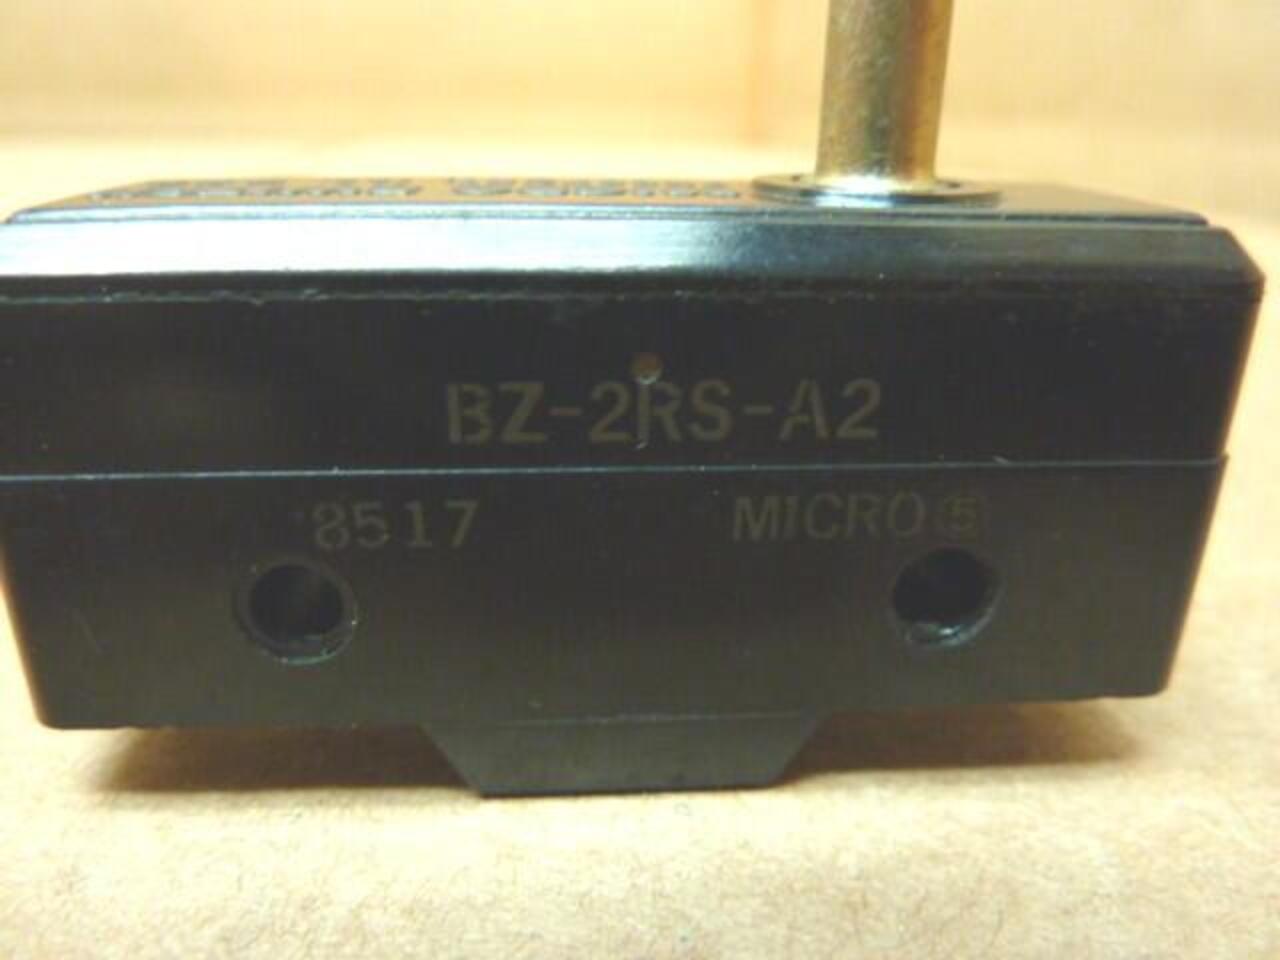 Lot of 2 250 or 480 VAC Micro Switch BZ-2RS-A2 15A 125